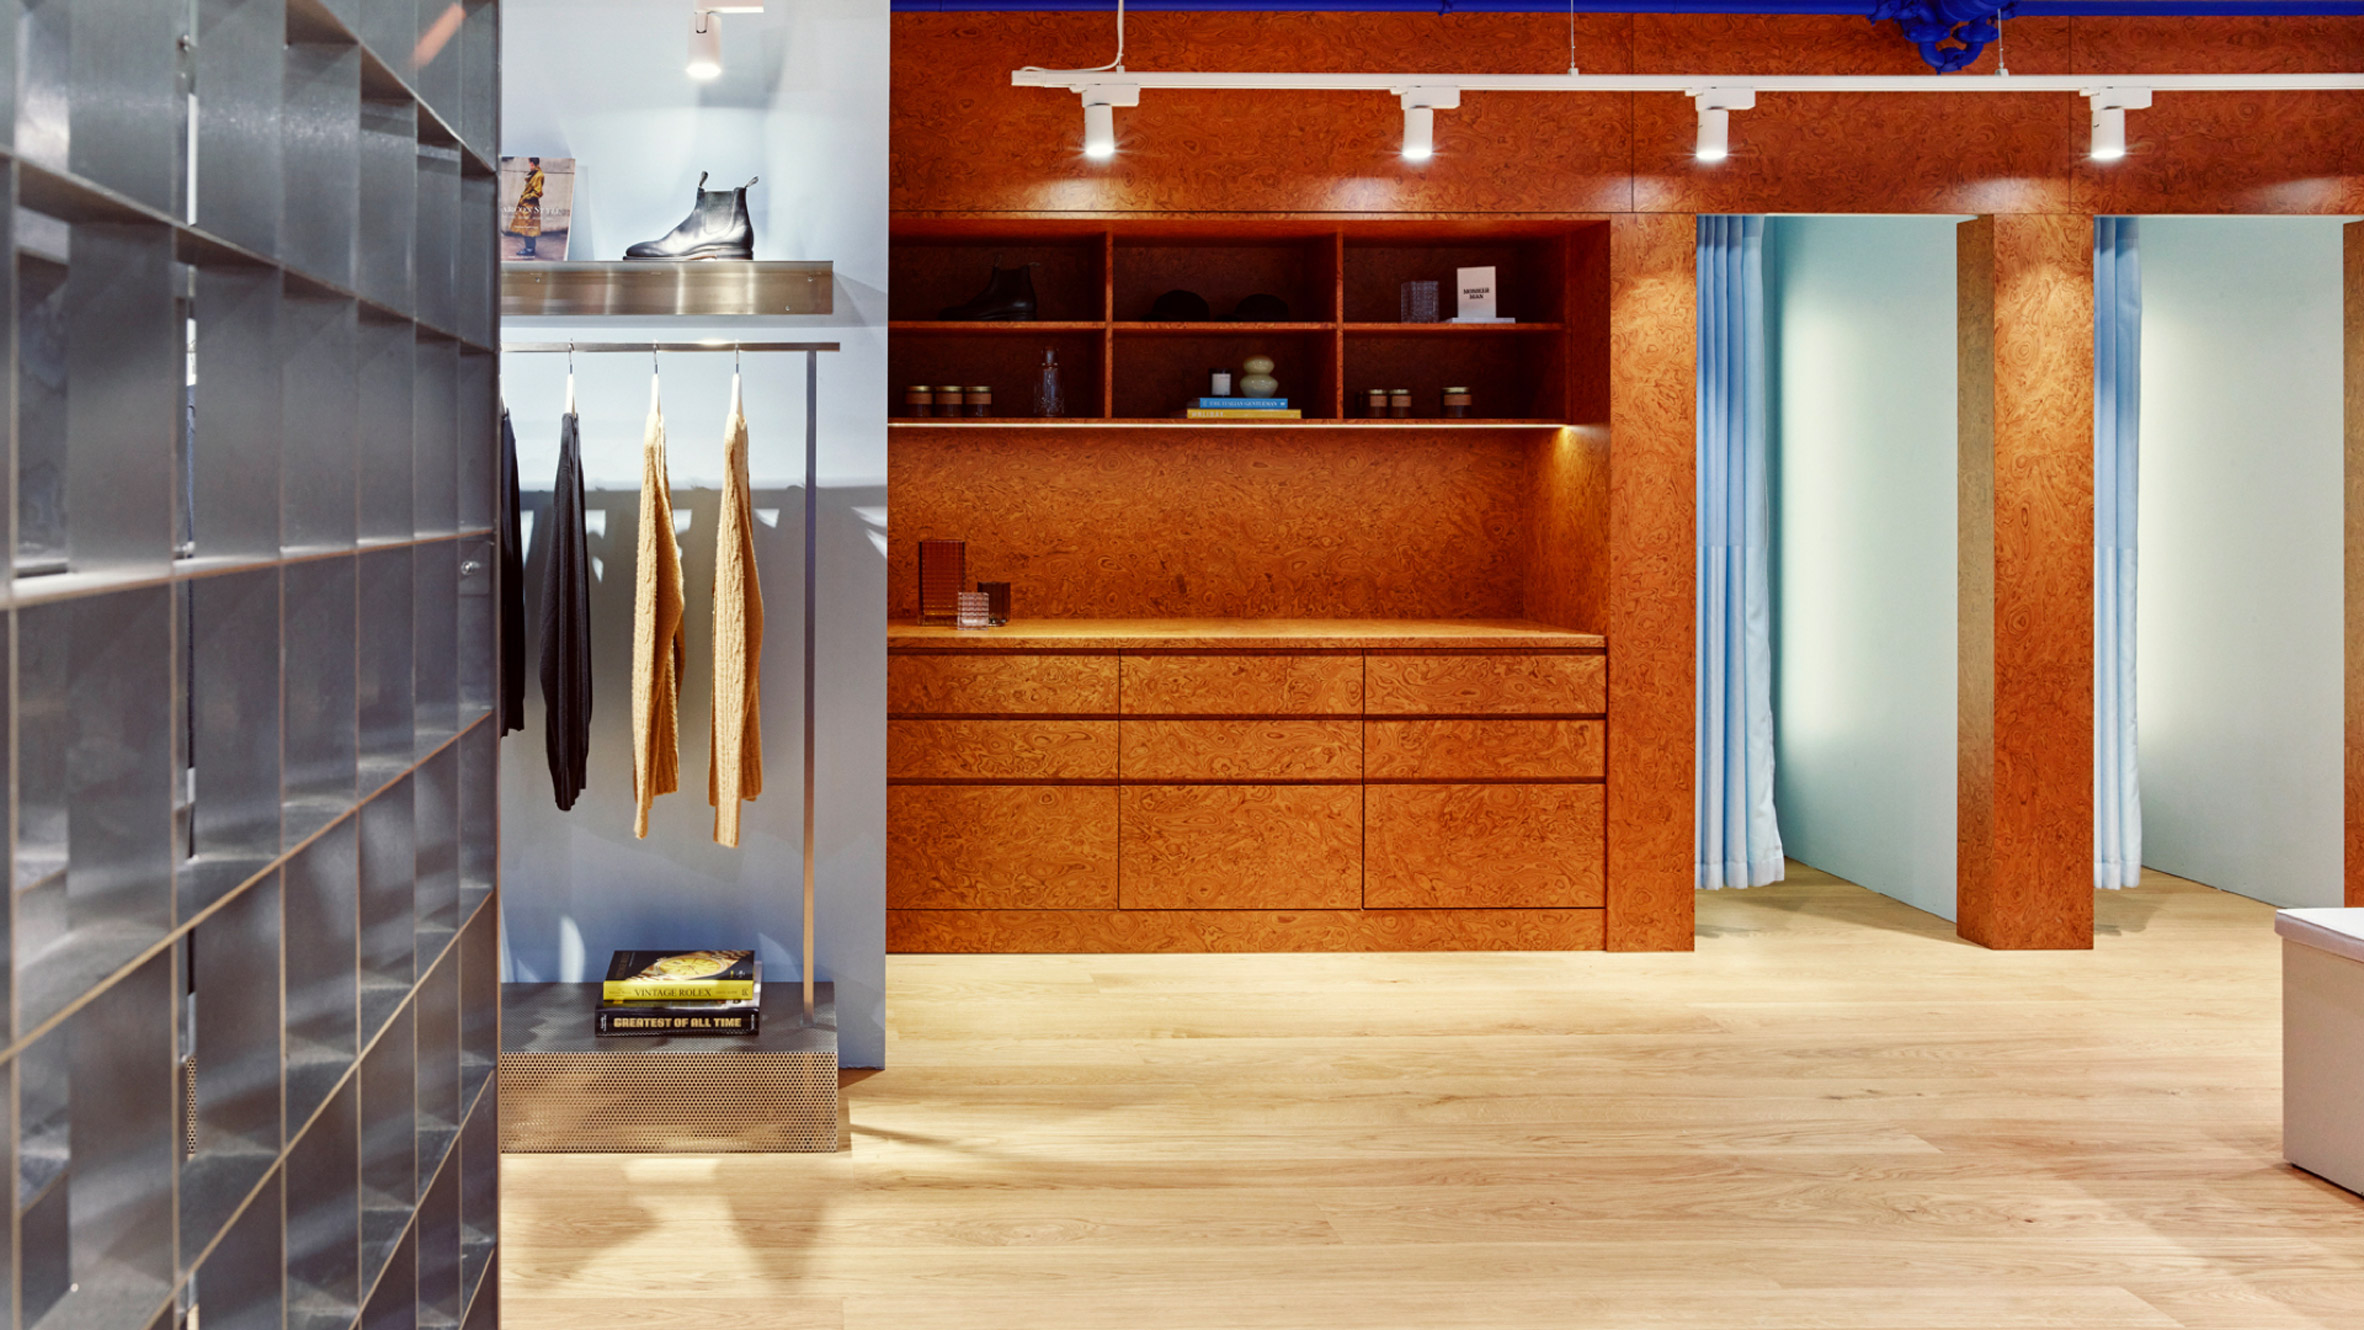 Burl wood joinery in an Oslo store interior designed by Snøhetta